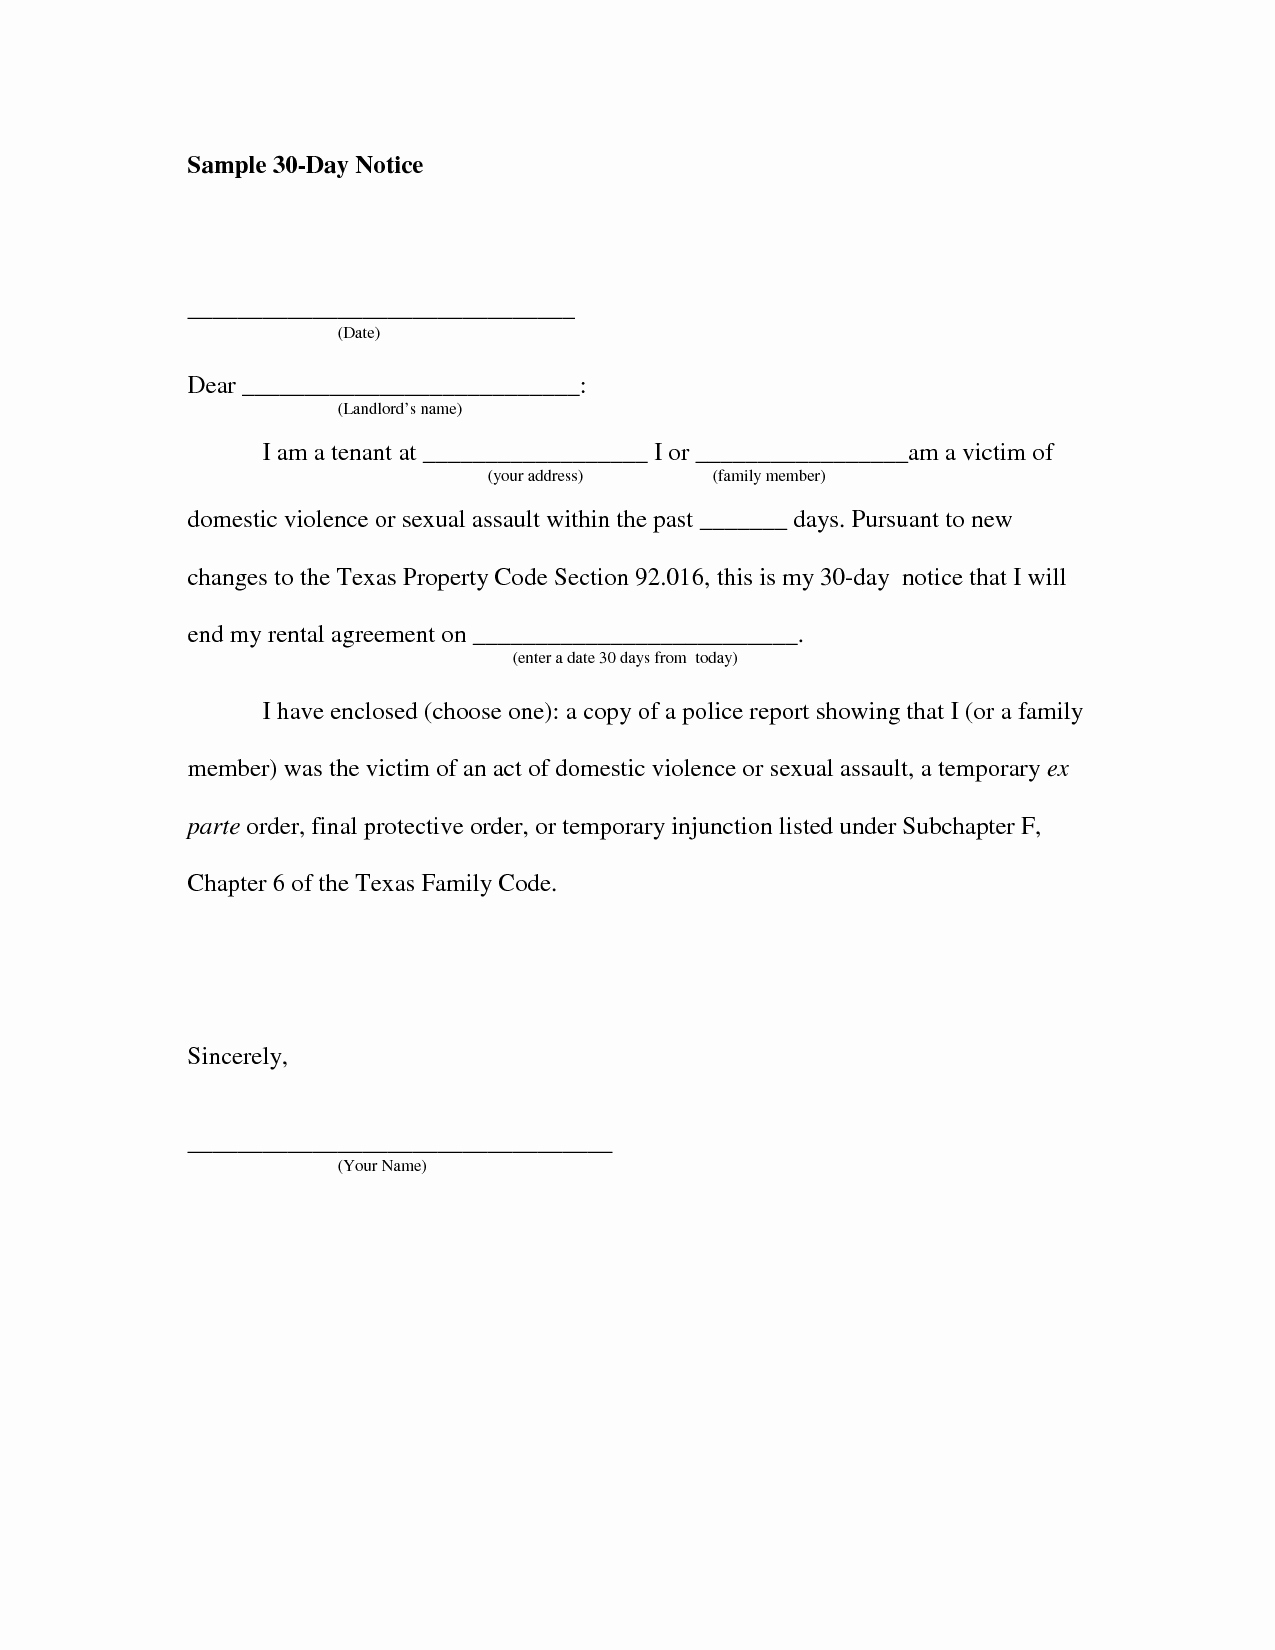 30 Day Notice to Landlord Template Unique Best S Of 30 Day Notice to Landlord Sample Letter